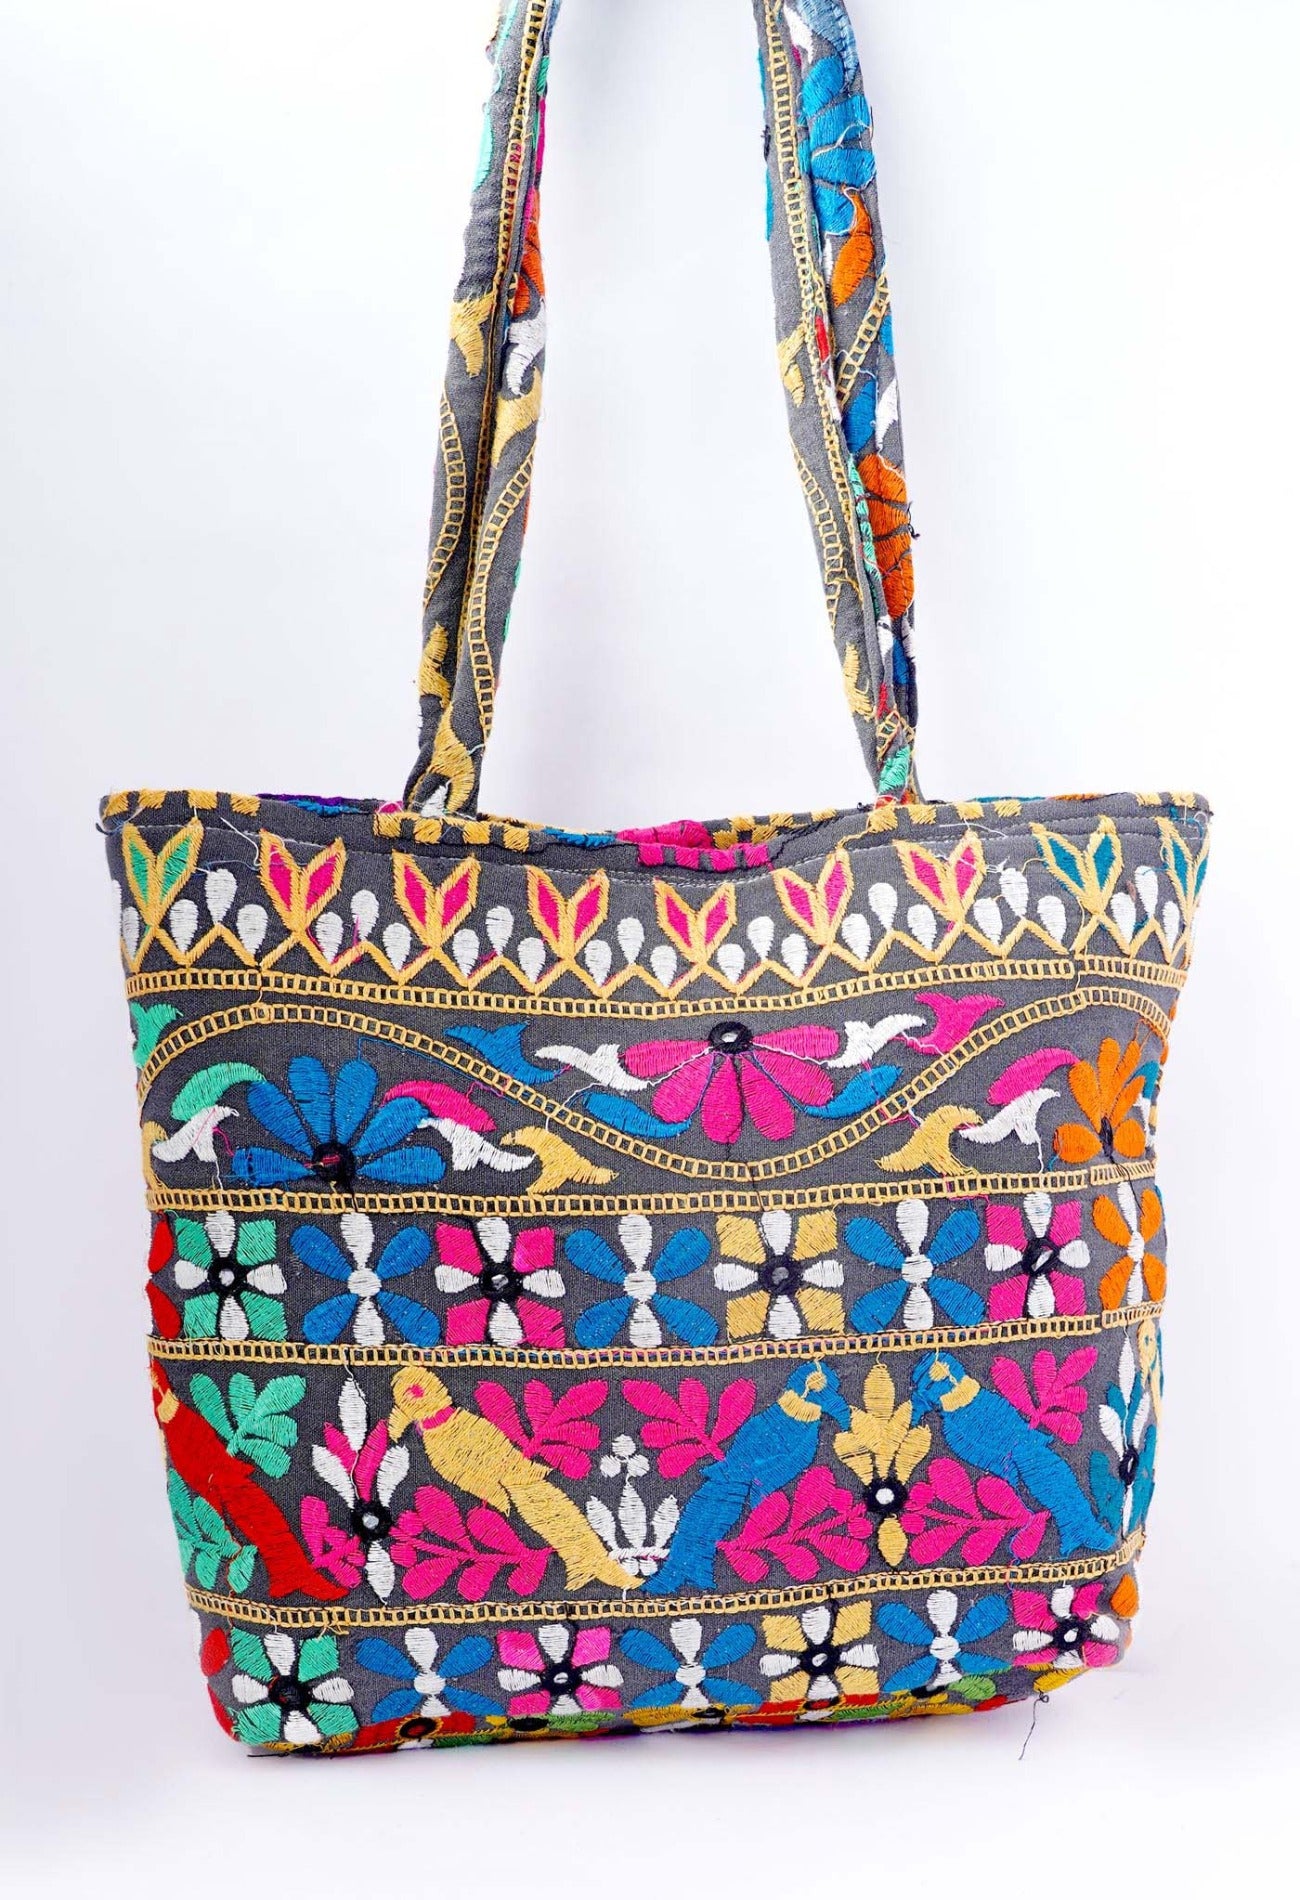 Online Shopping for Multi Indian Handicraft Embroidered Hand Bag with Weaving from Rajasthan at Unnatisilks.com India_x000D_
Online Shopping for Multi Indian Handicraft Embroidered Hand Bag with Weaving from Rajasthan at Unnatisilks.com India_x000D_
